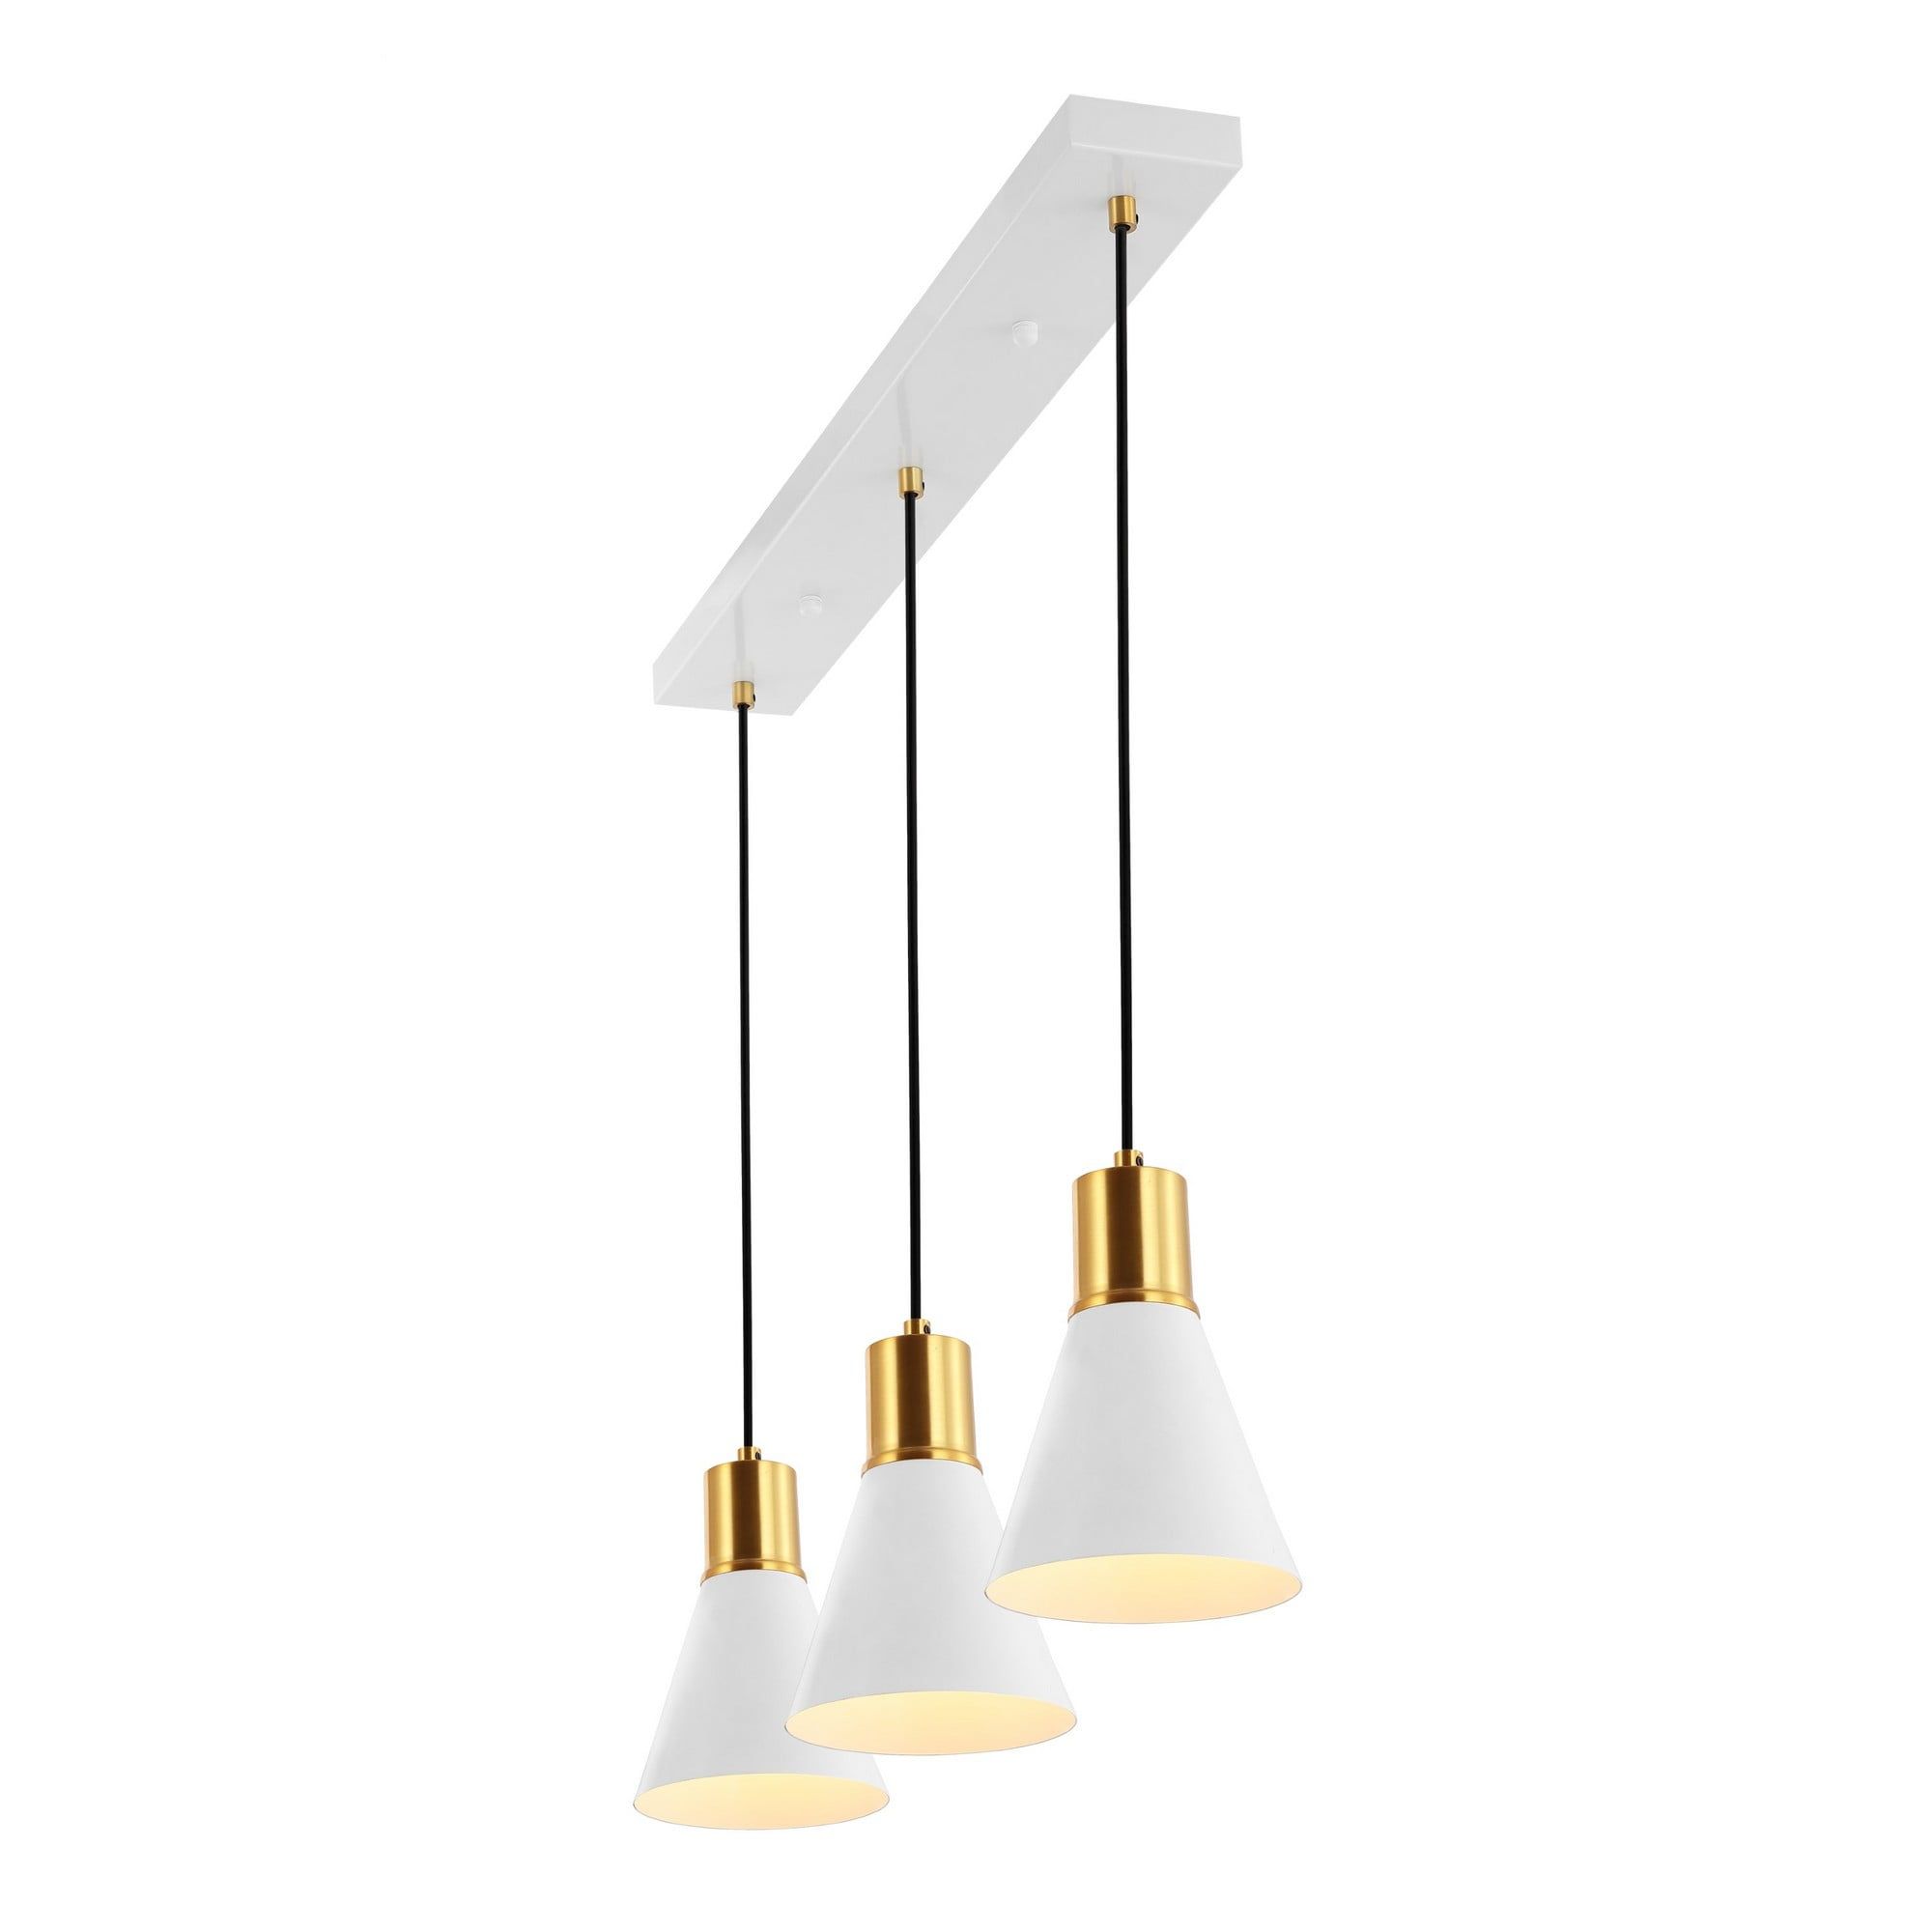 Apollo White and Brass Gold 33.5" Adjustable Linear LED Pendant